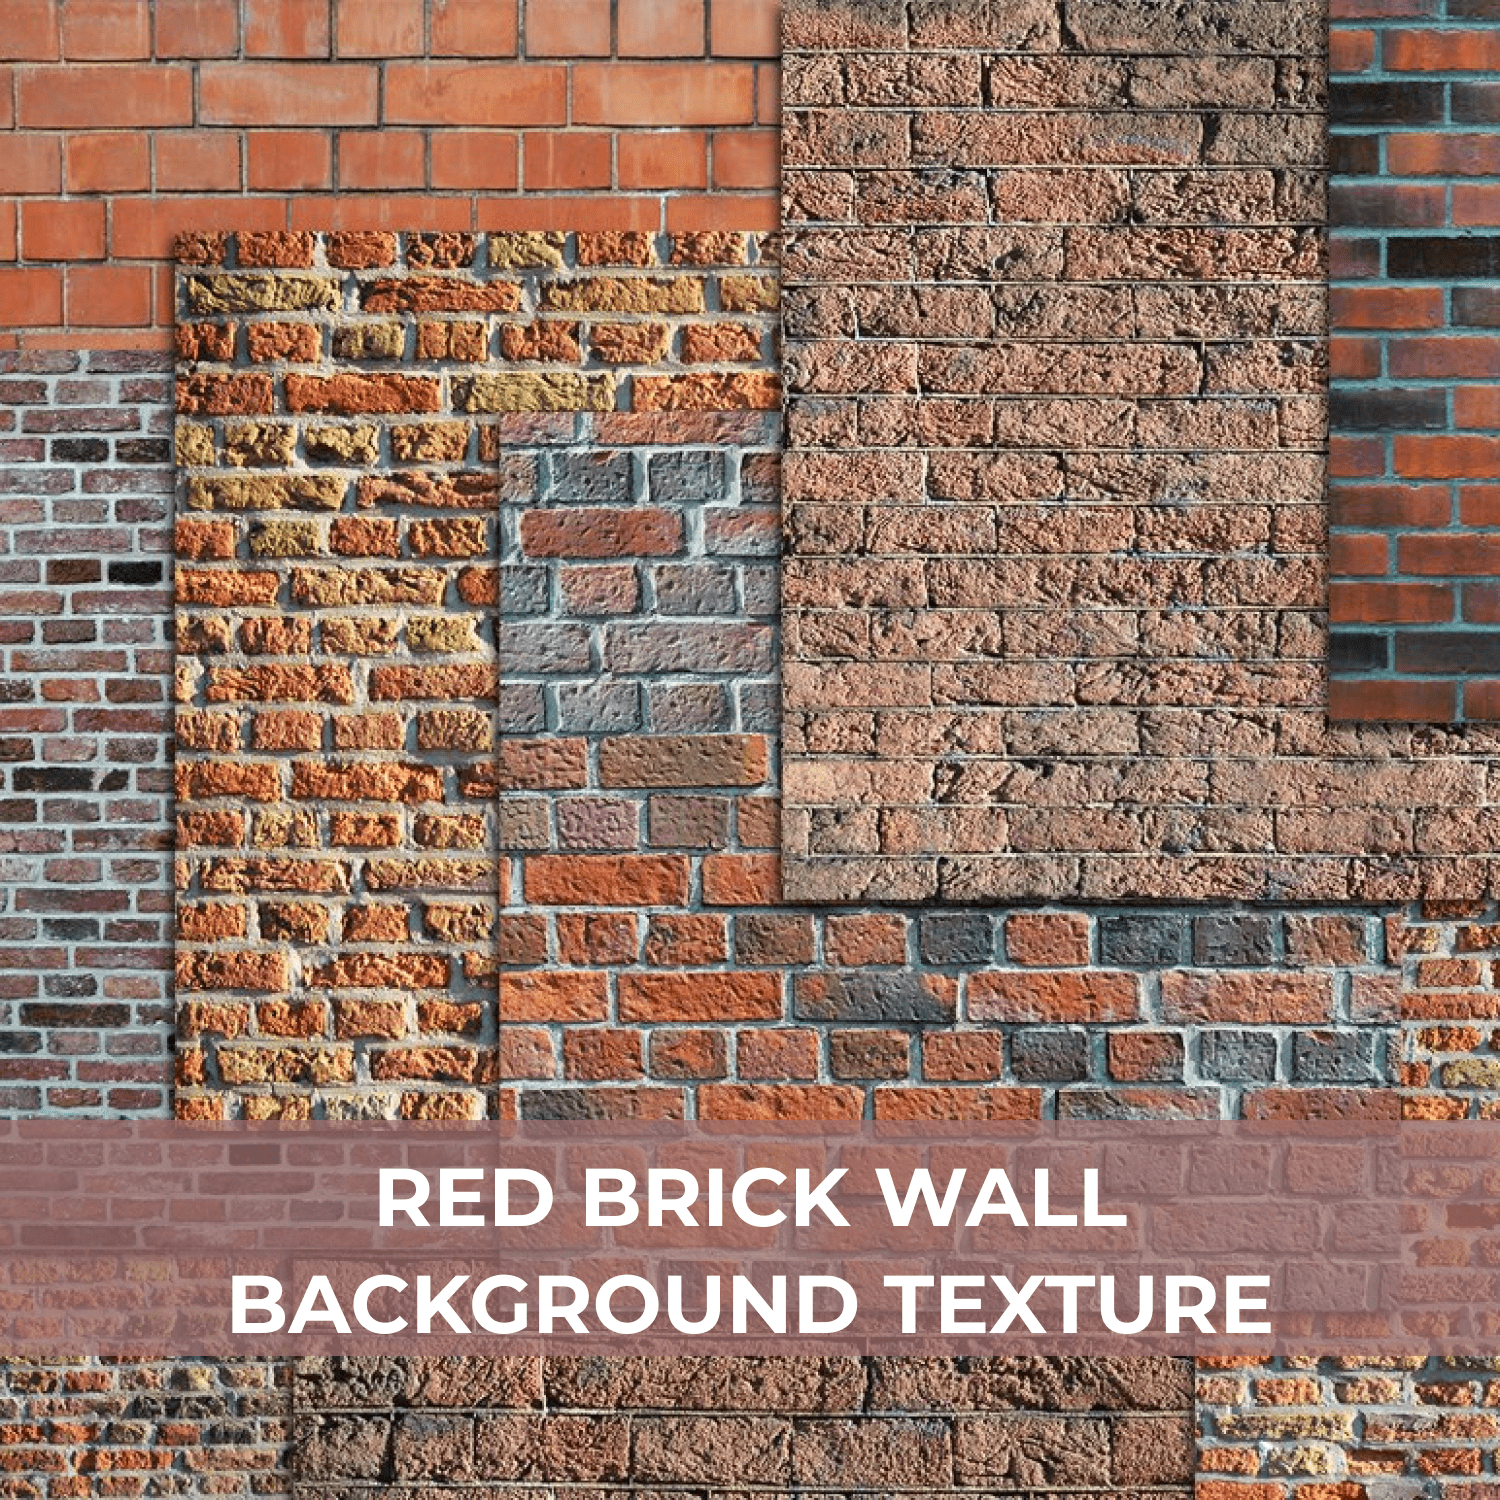 Red Brick Wall Background Texture cover.